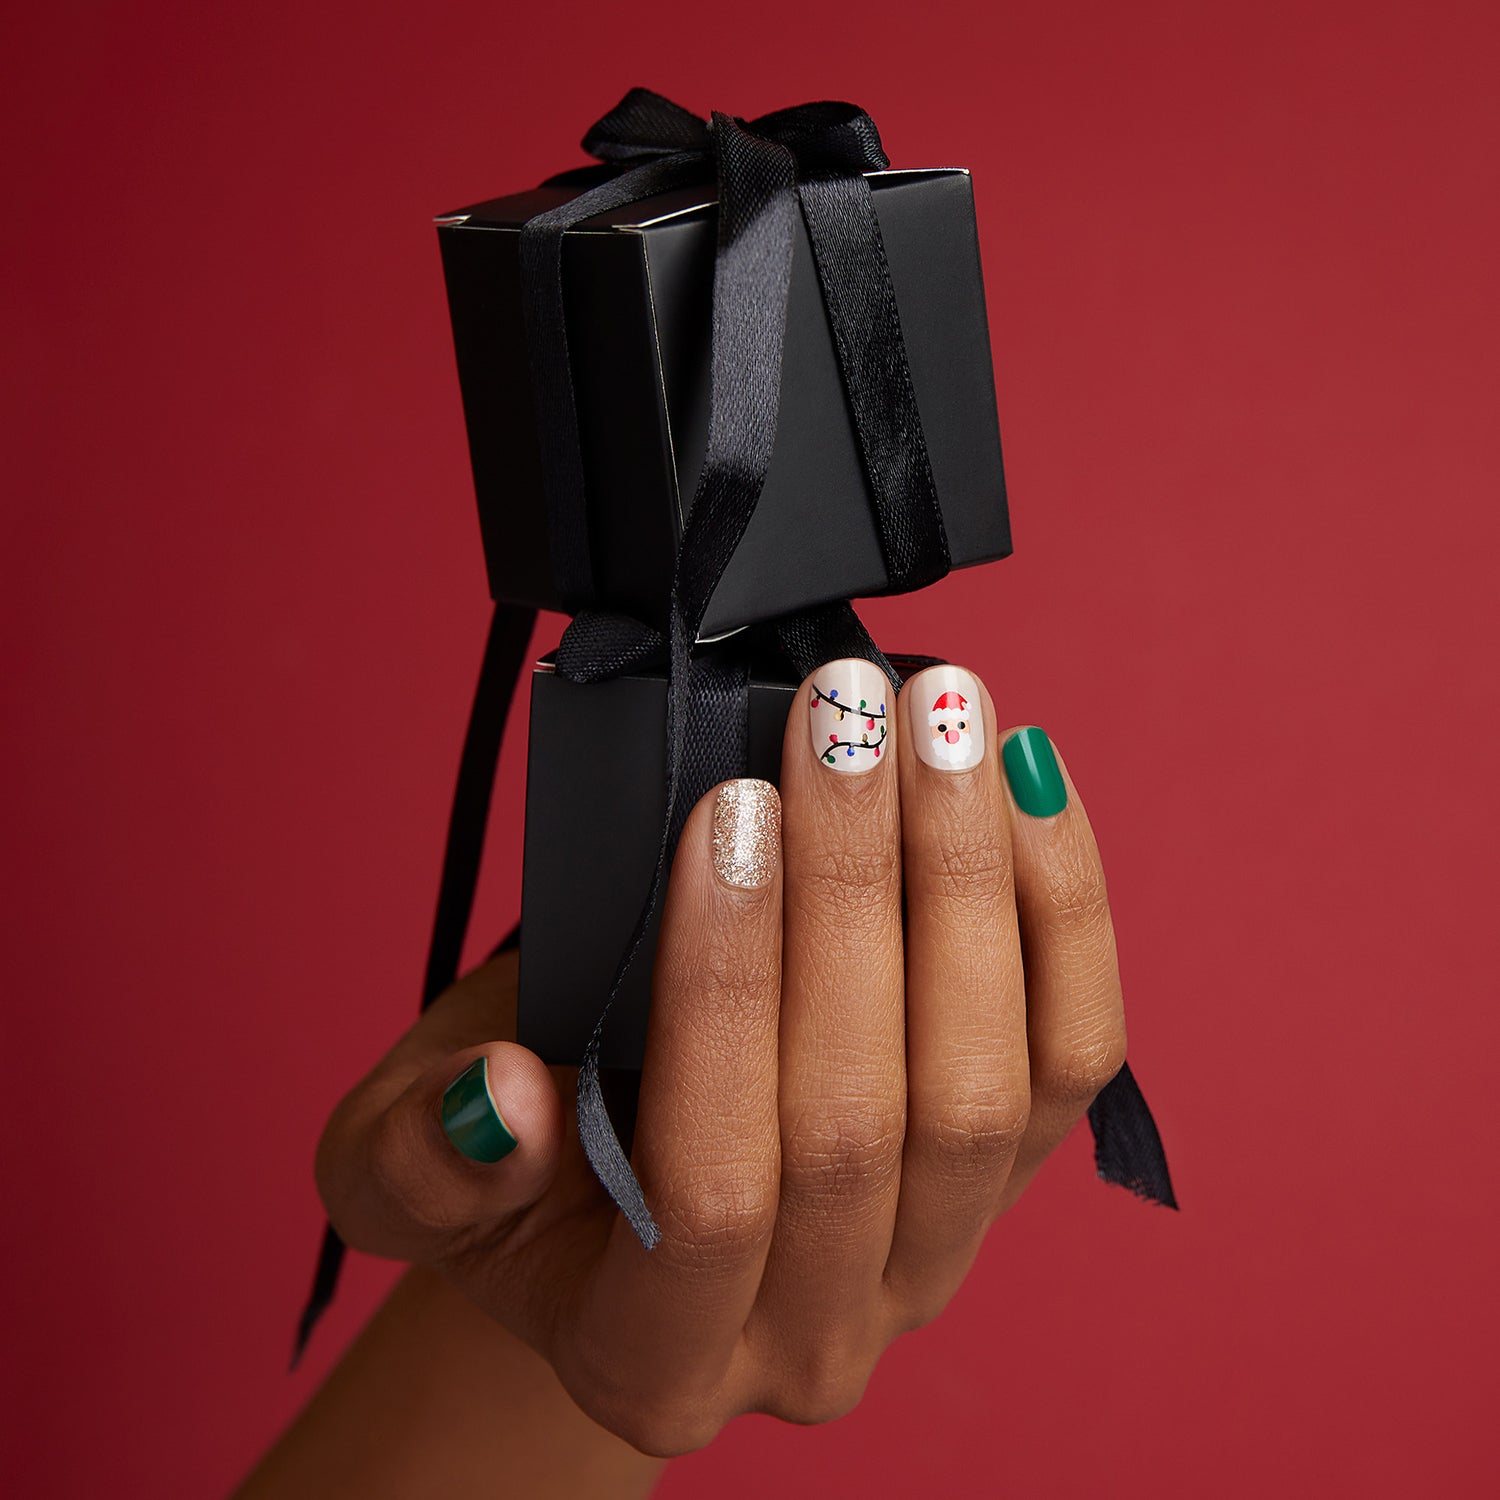 Solid green, solid sheer nude, glittered red, and glittered champagne nail strips featuring santa & tree icons and string light accents with a glossy, high-shine finish.